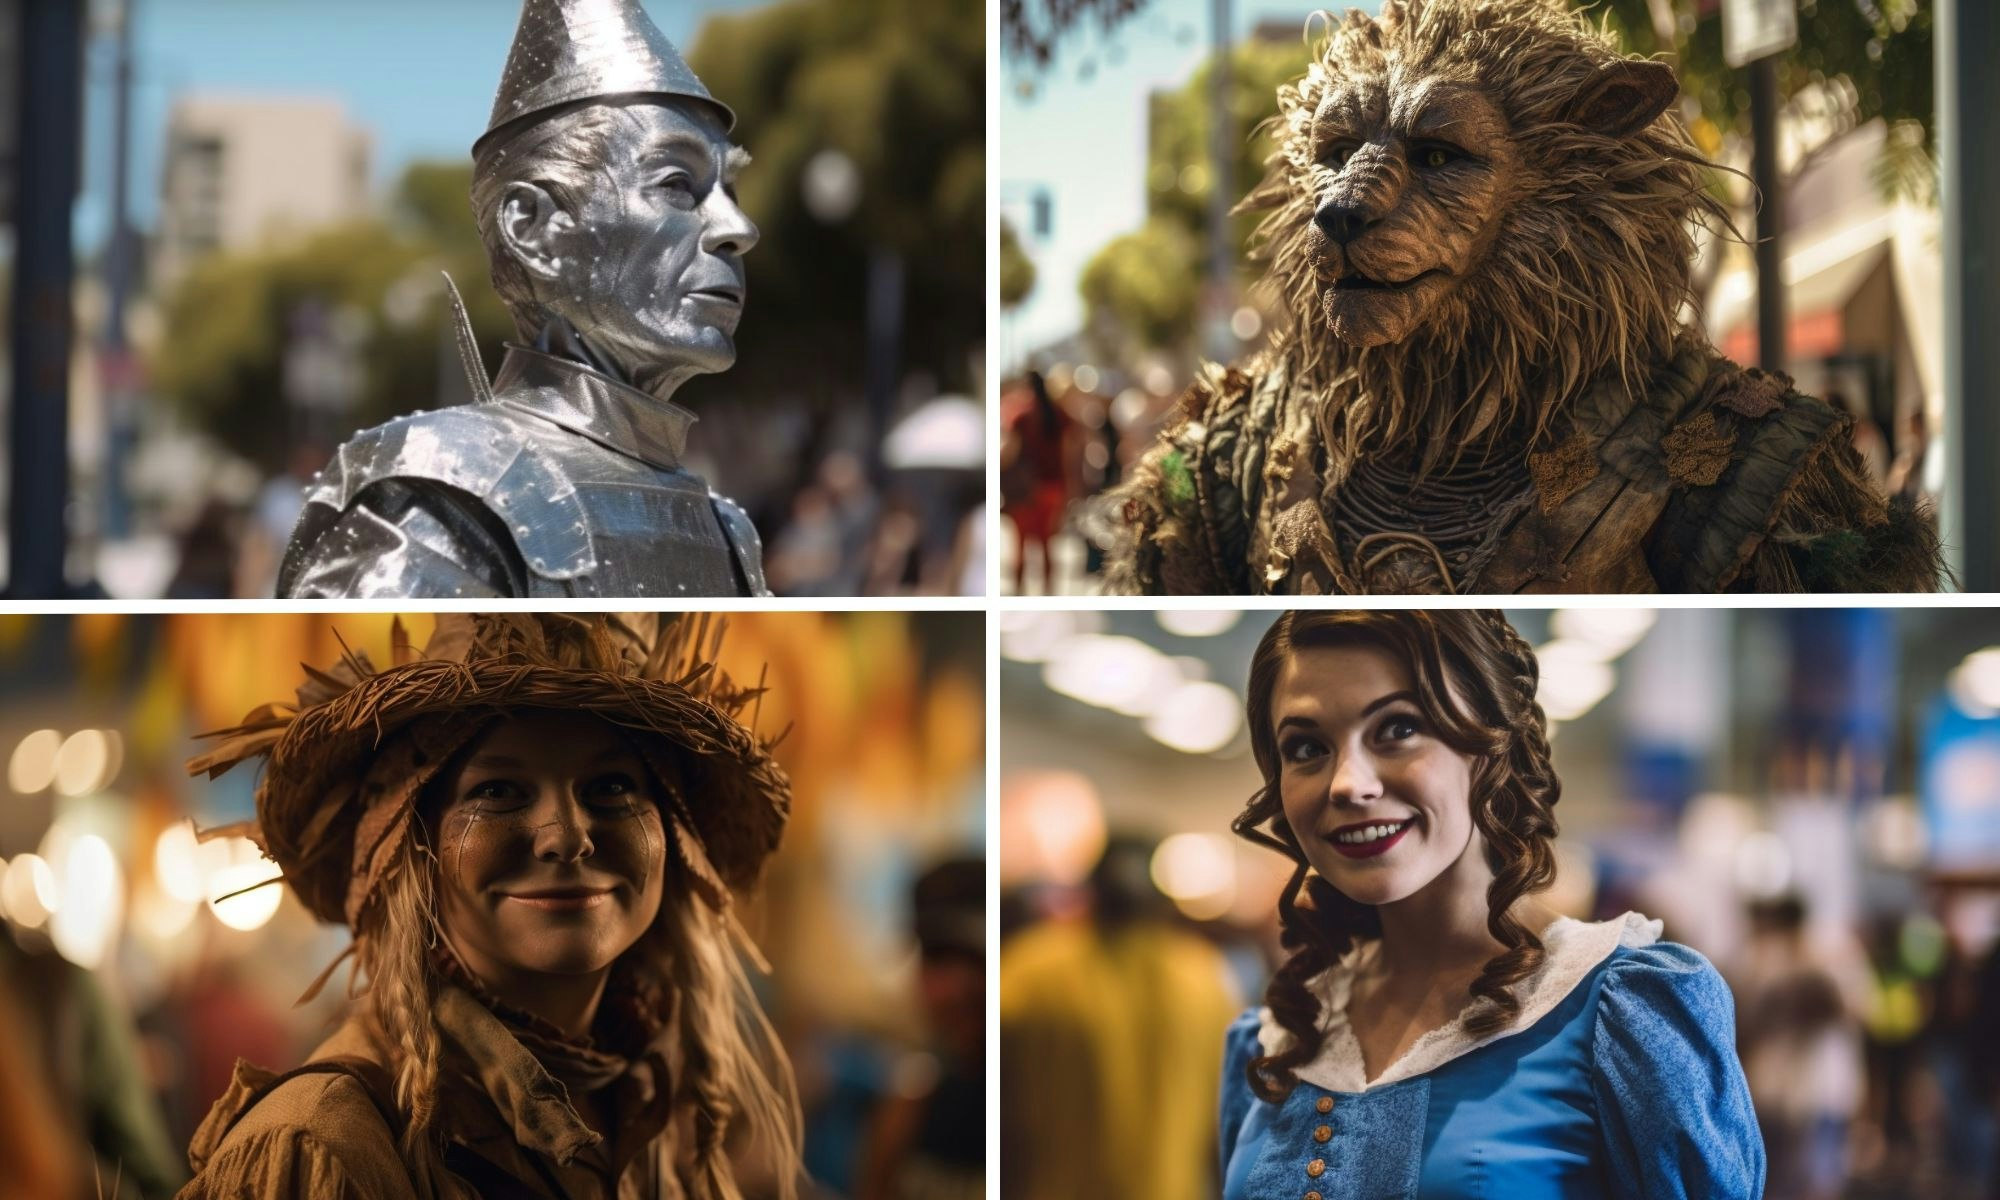 The Wizard of Oz Experience in Warrnambool